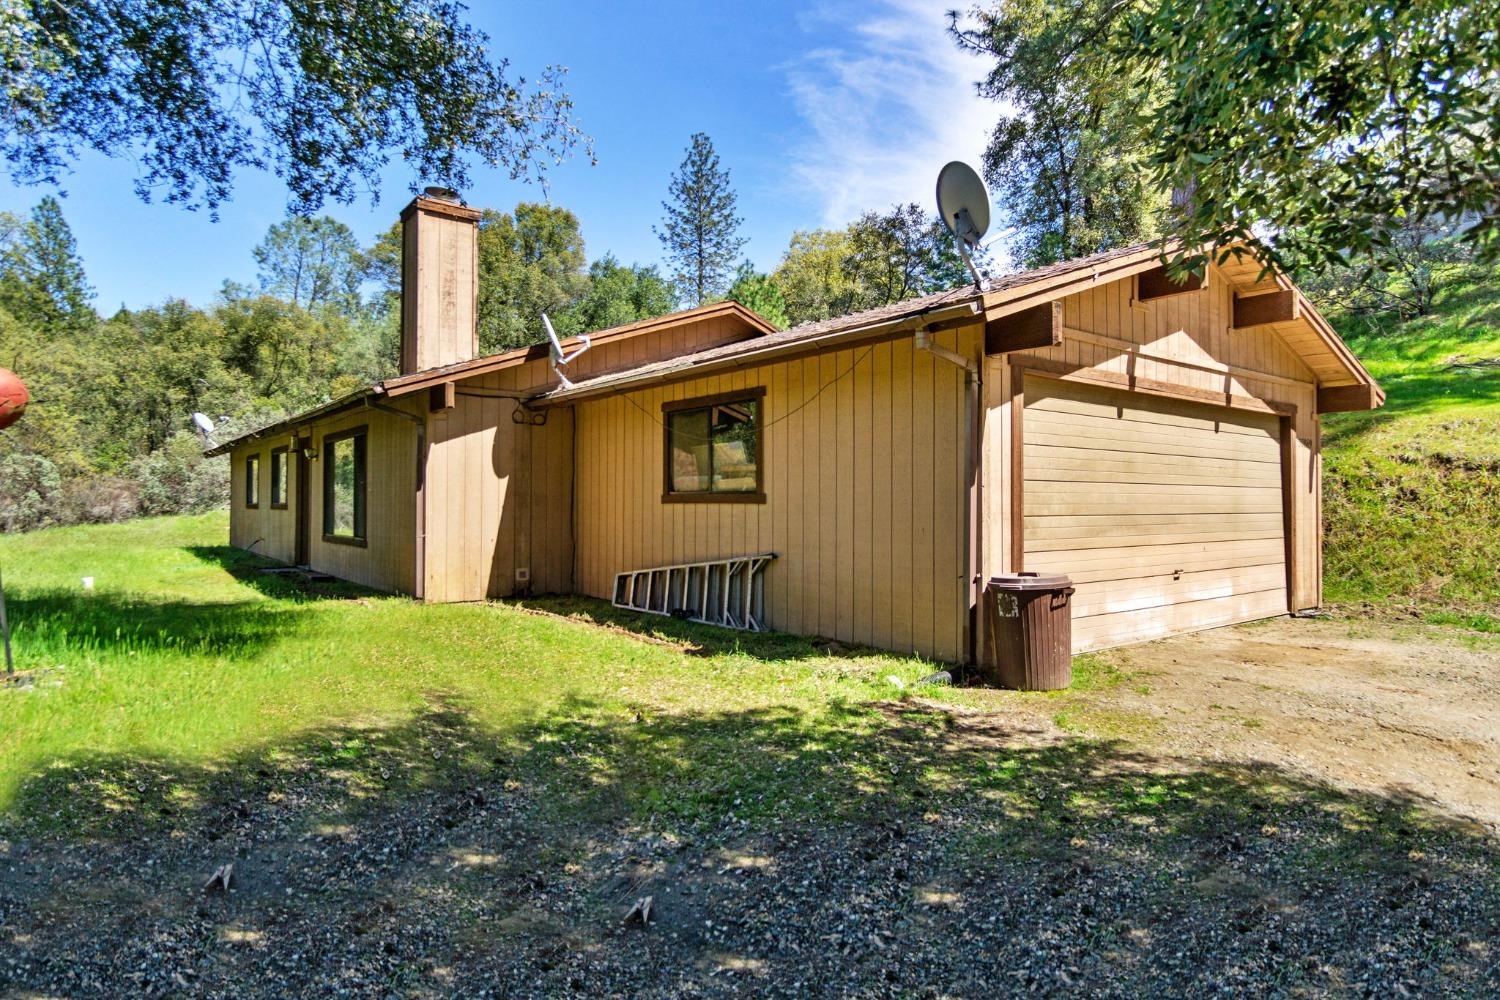 Photo of 50869 Westview Ct in Oakhurst, CA